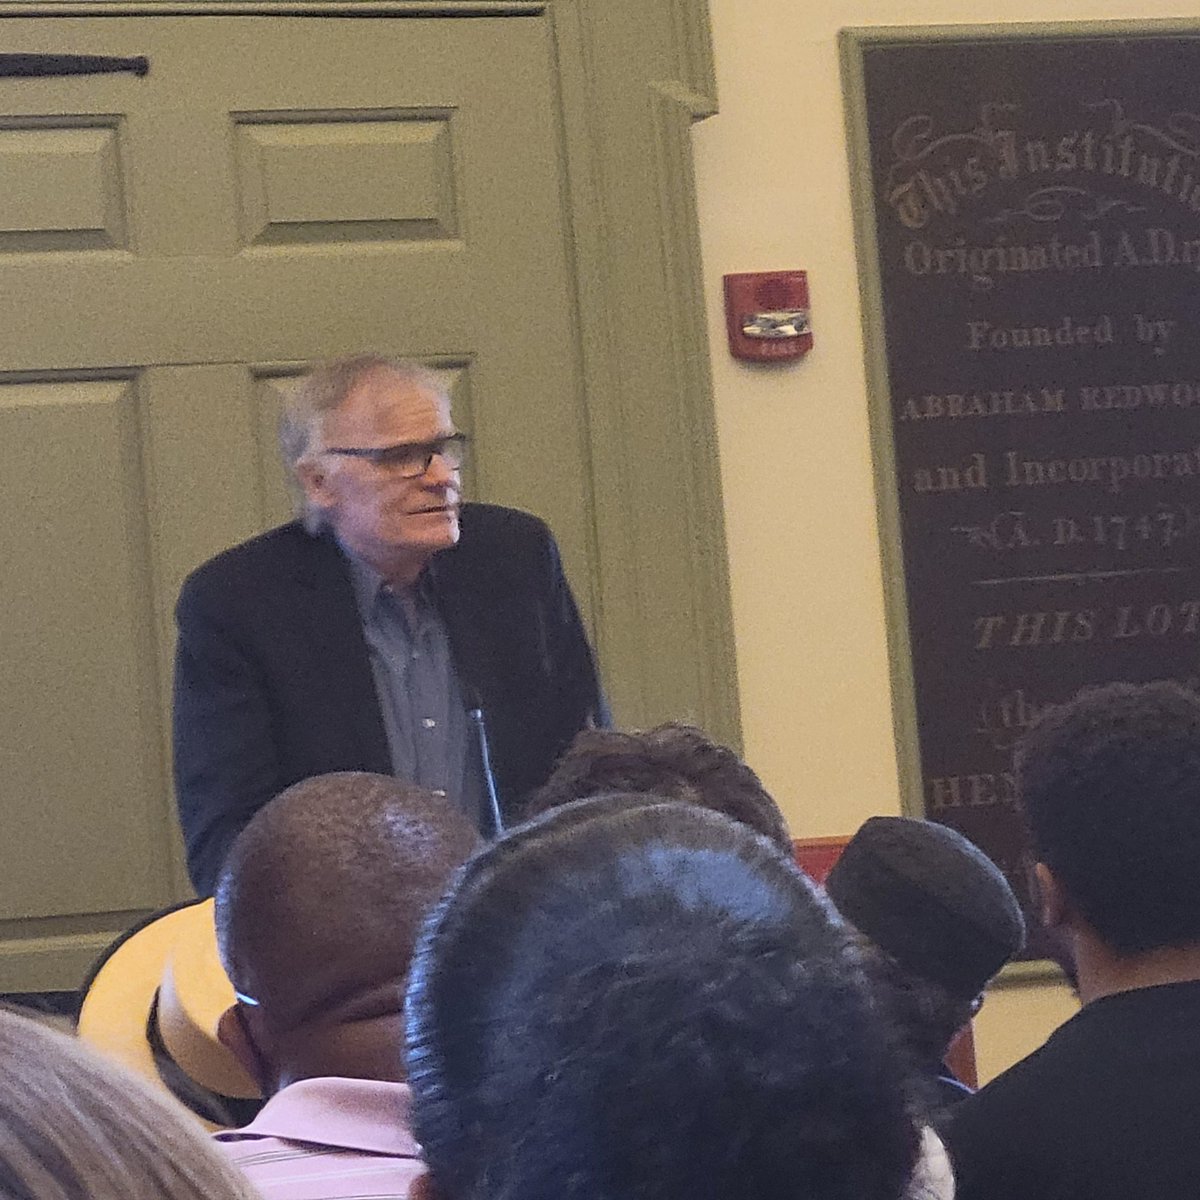 Happy to be in Newport today at the historic Redwood Library and Athenaeum for a great StagesofFreedom lecture on Frederick Douglass from Pulitzer Prize winning historian @davidwblight. Proceeds benefited the StagesofFreedom Swim Empowerment Program. @rayrickman @MrRJGMartin https://t.co/xU1MioanUX